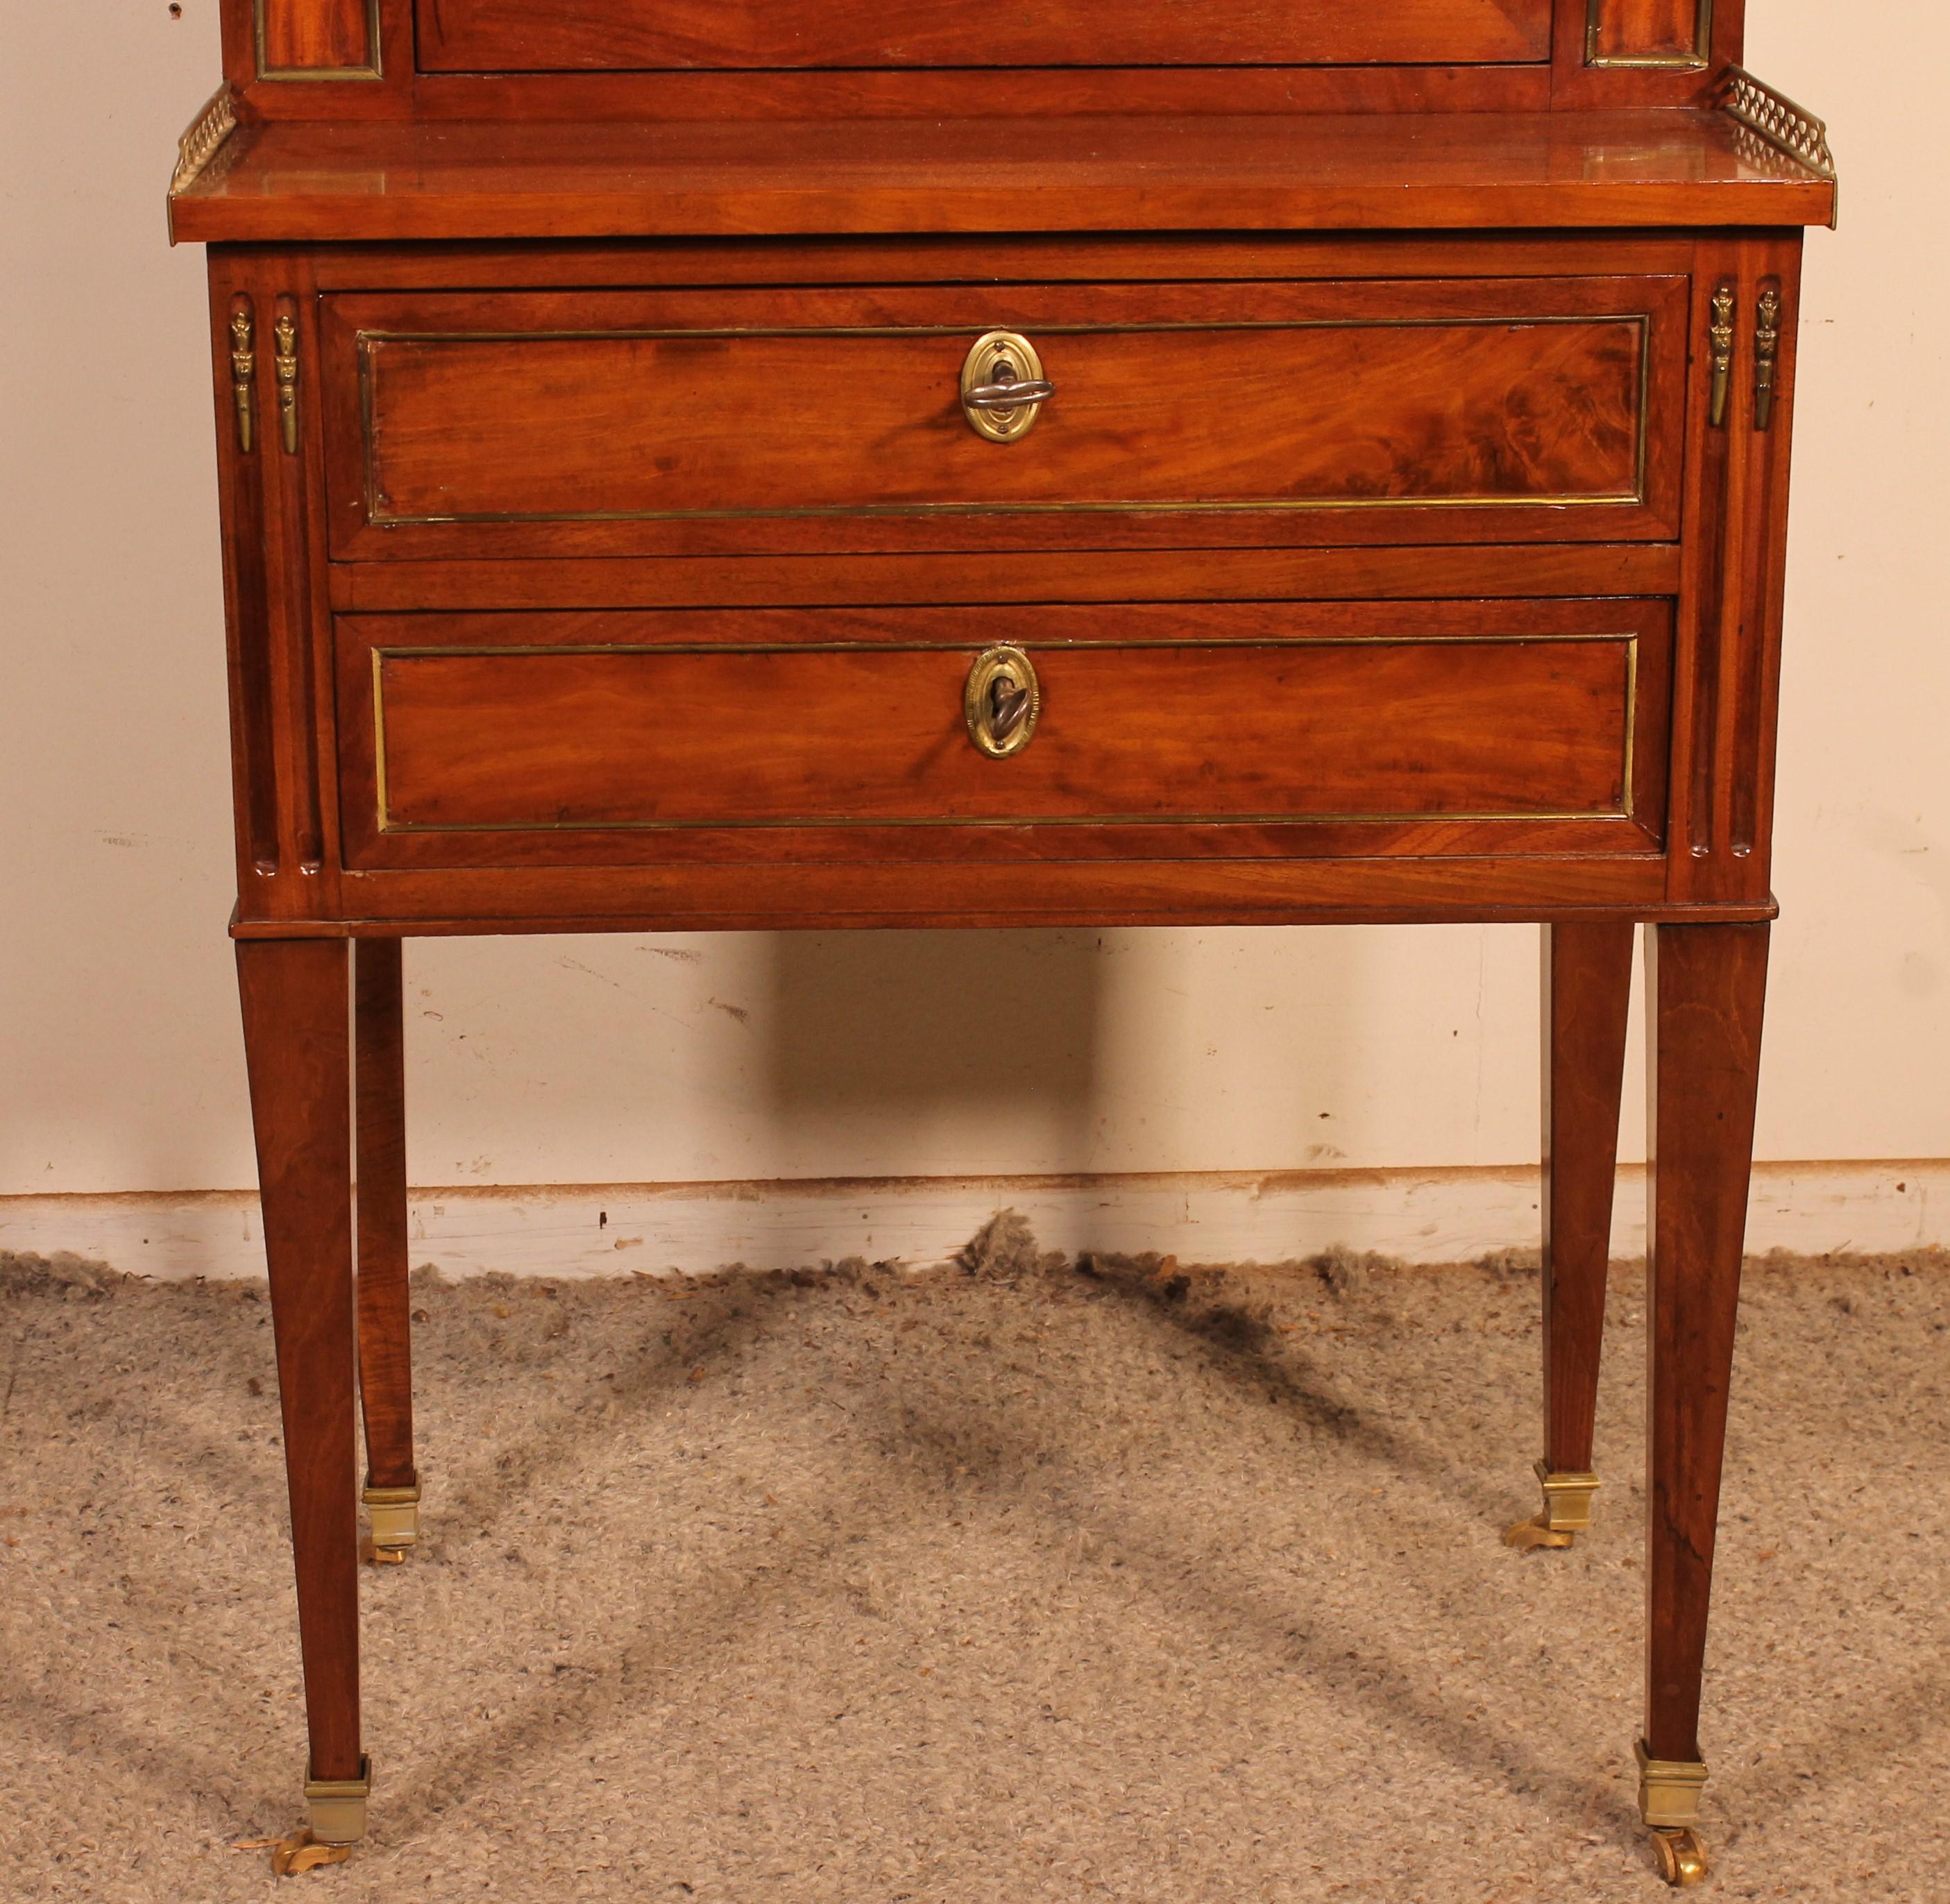 lovely and rare bonheur du jour Louis XVI in mahogany from the end of the 18th century.
Very beautiful little secretary in mahogany with its back in polished solid mahogany which is unusual and a sign of good quality.

The upper part has a drawer